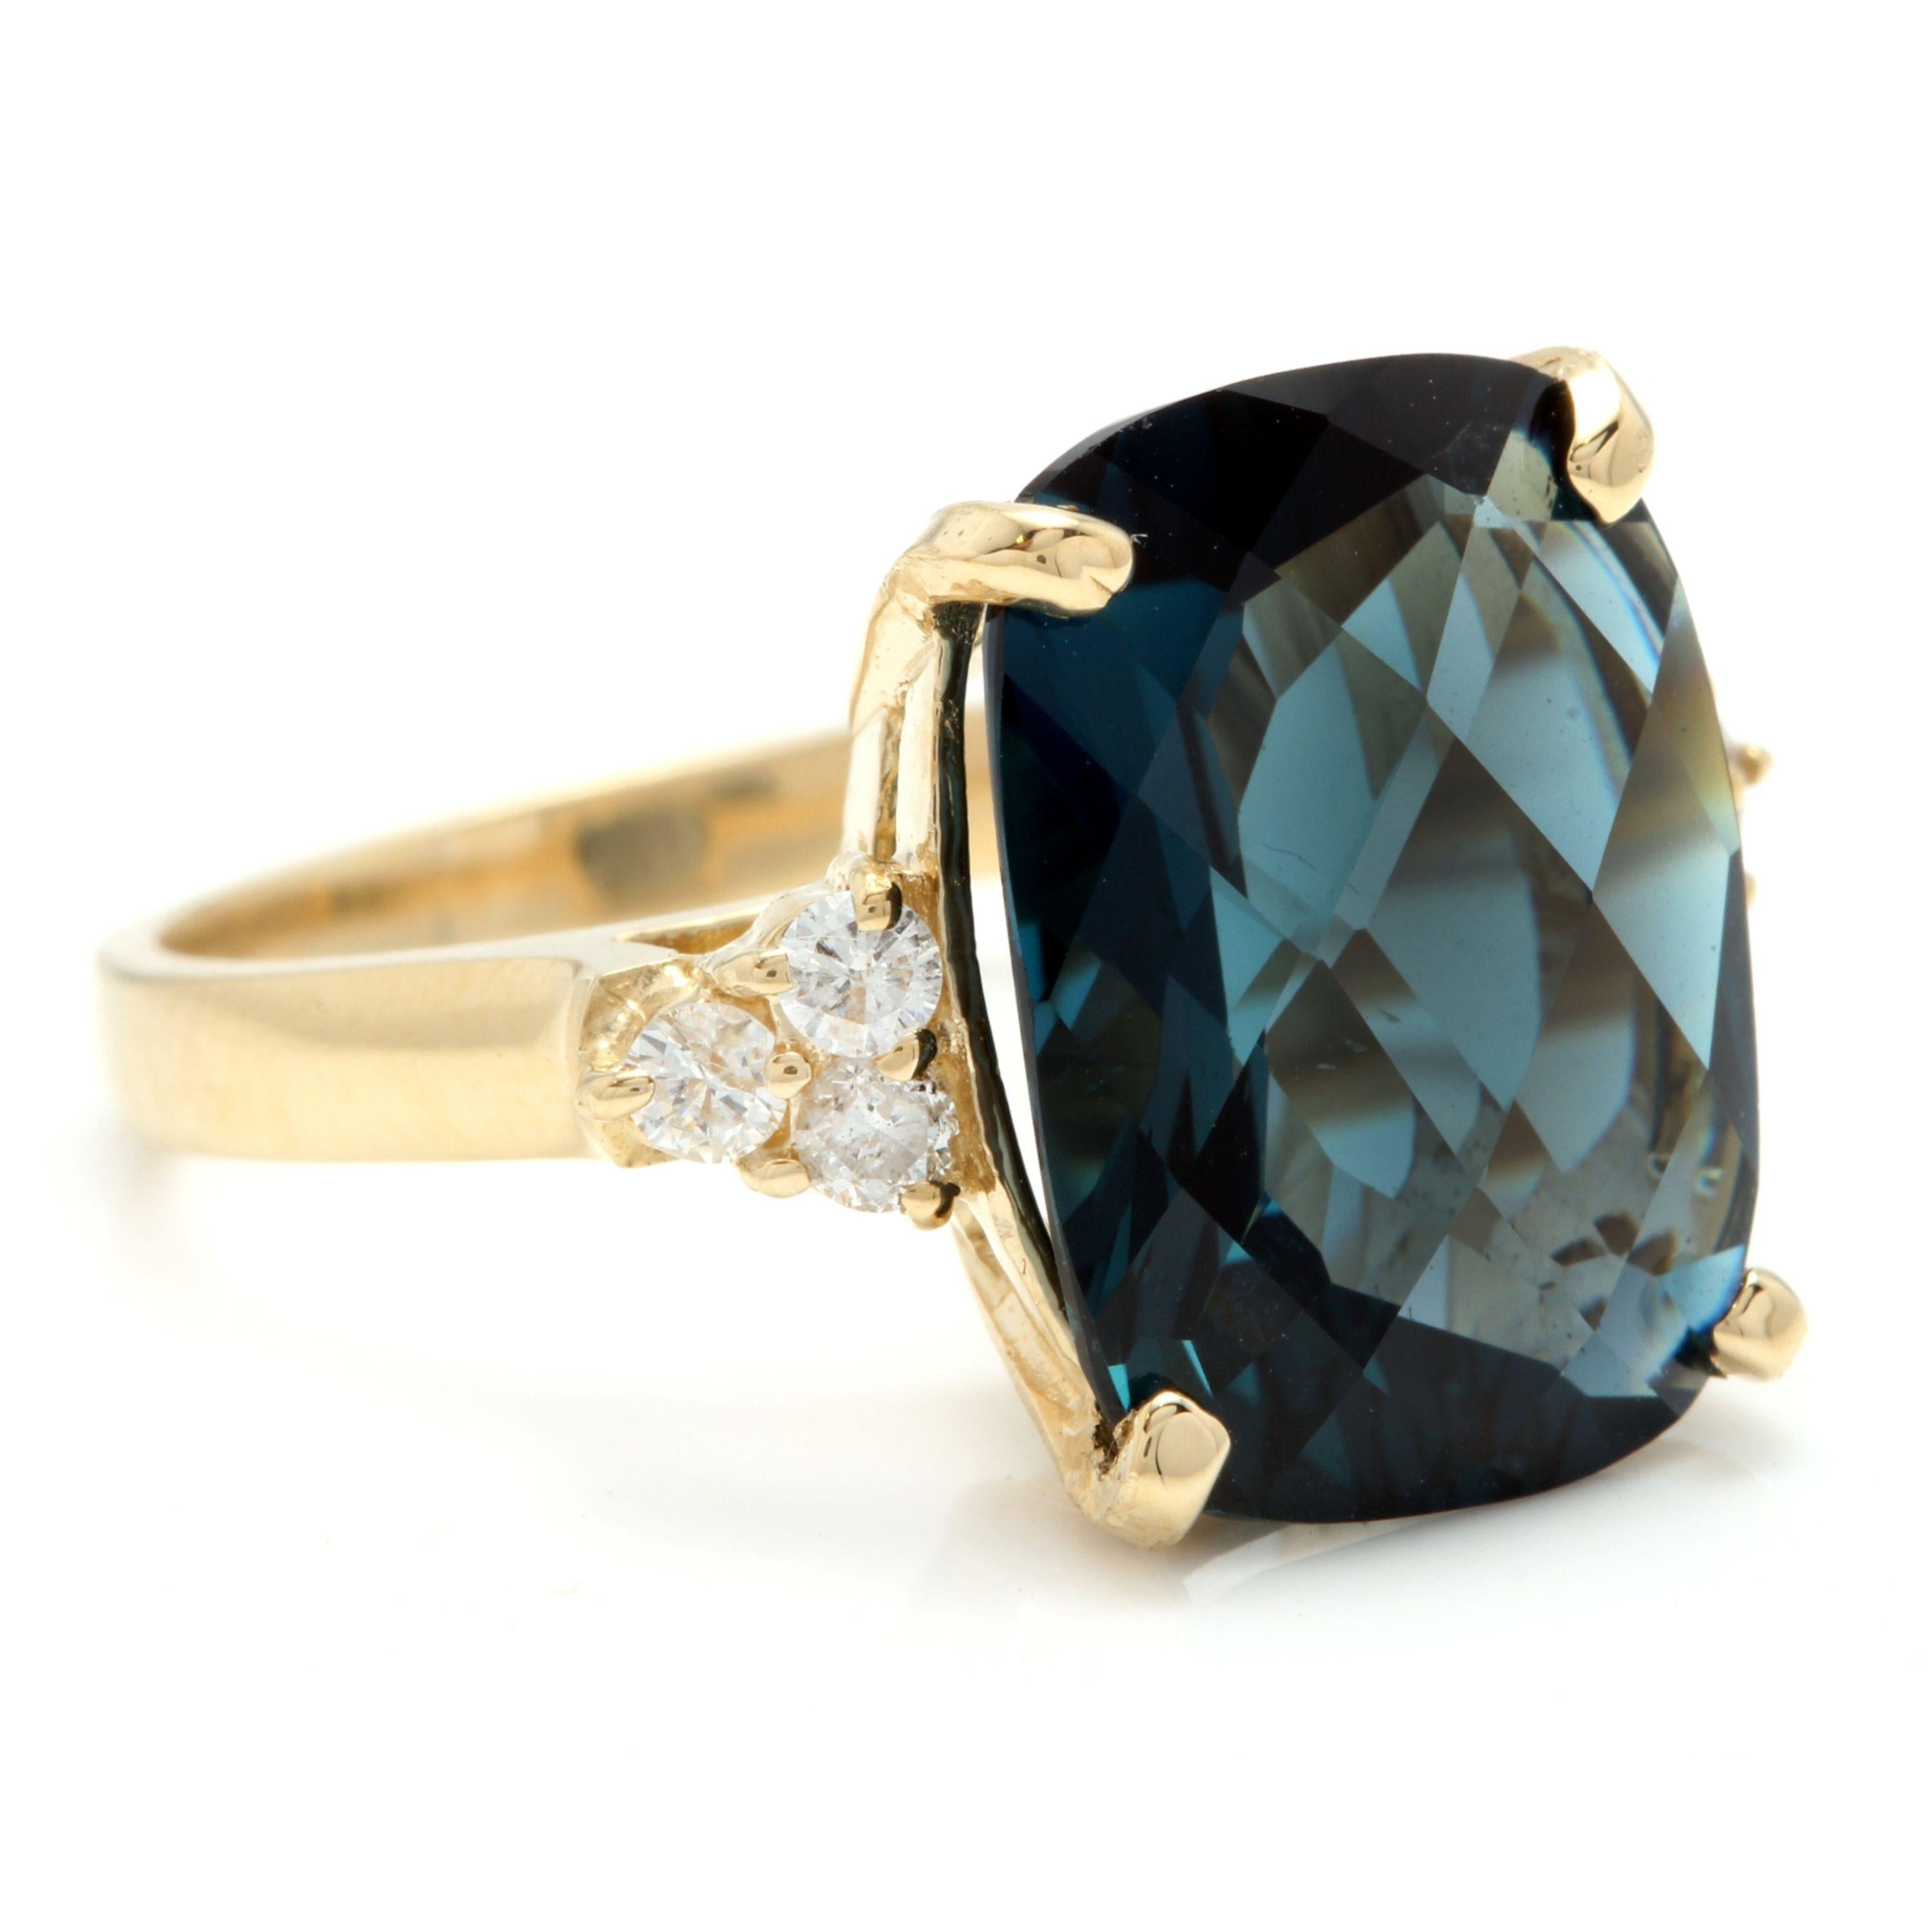 9.35 Carats Natural Impressive London Blue Topaz and Diamond 14K Yellow Gold Ring

Total Natural London Blue Topaz Weight: Approx. 9.00 Carats

London Blue Topaz Measures: 16 x 12mm

Natural Round Diamonds Weight: 0.35 Carats (color G-H / Clarity